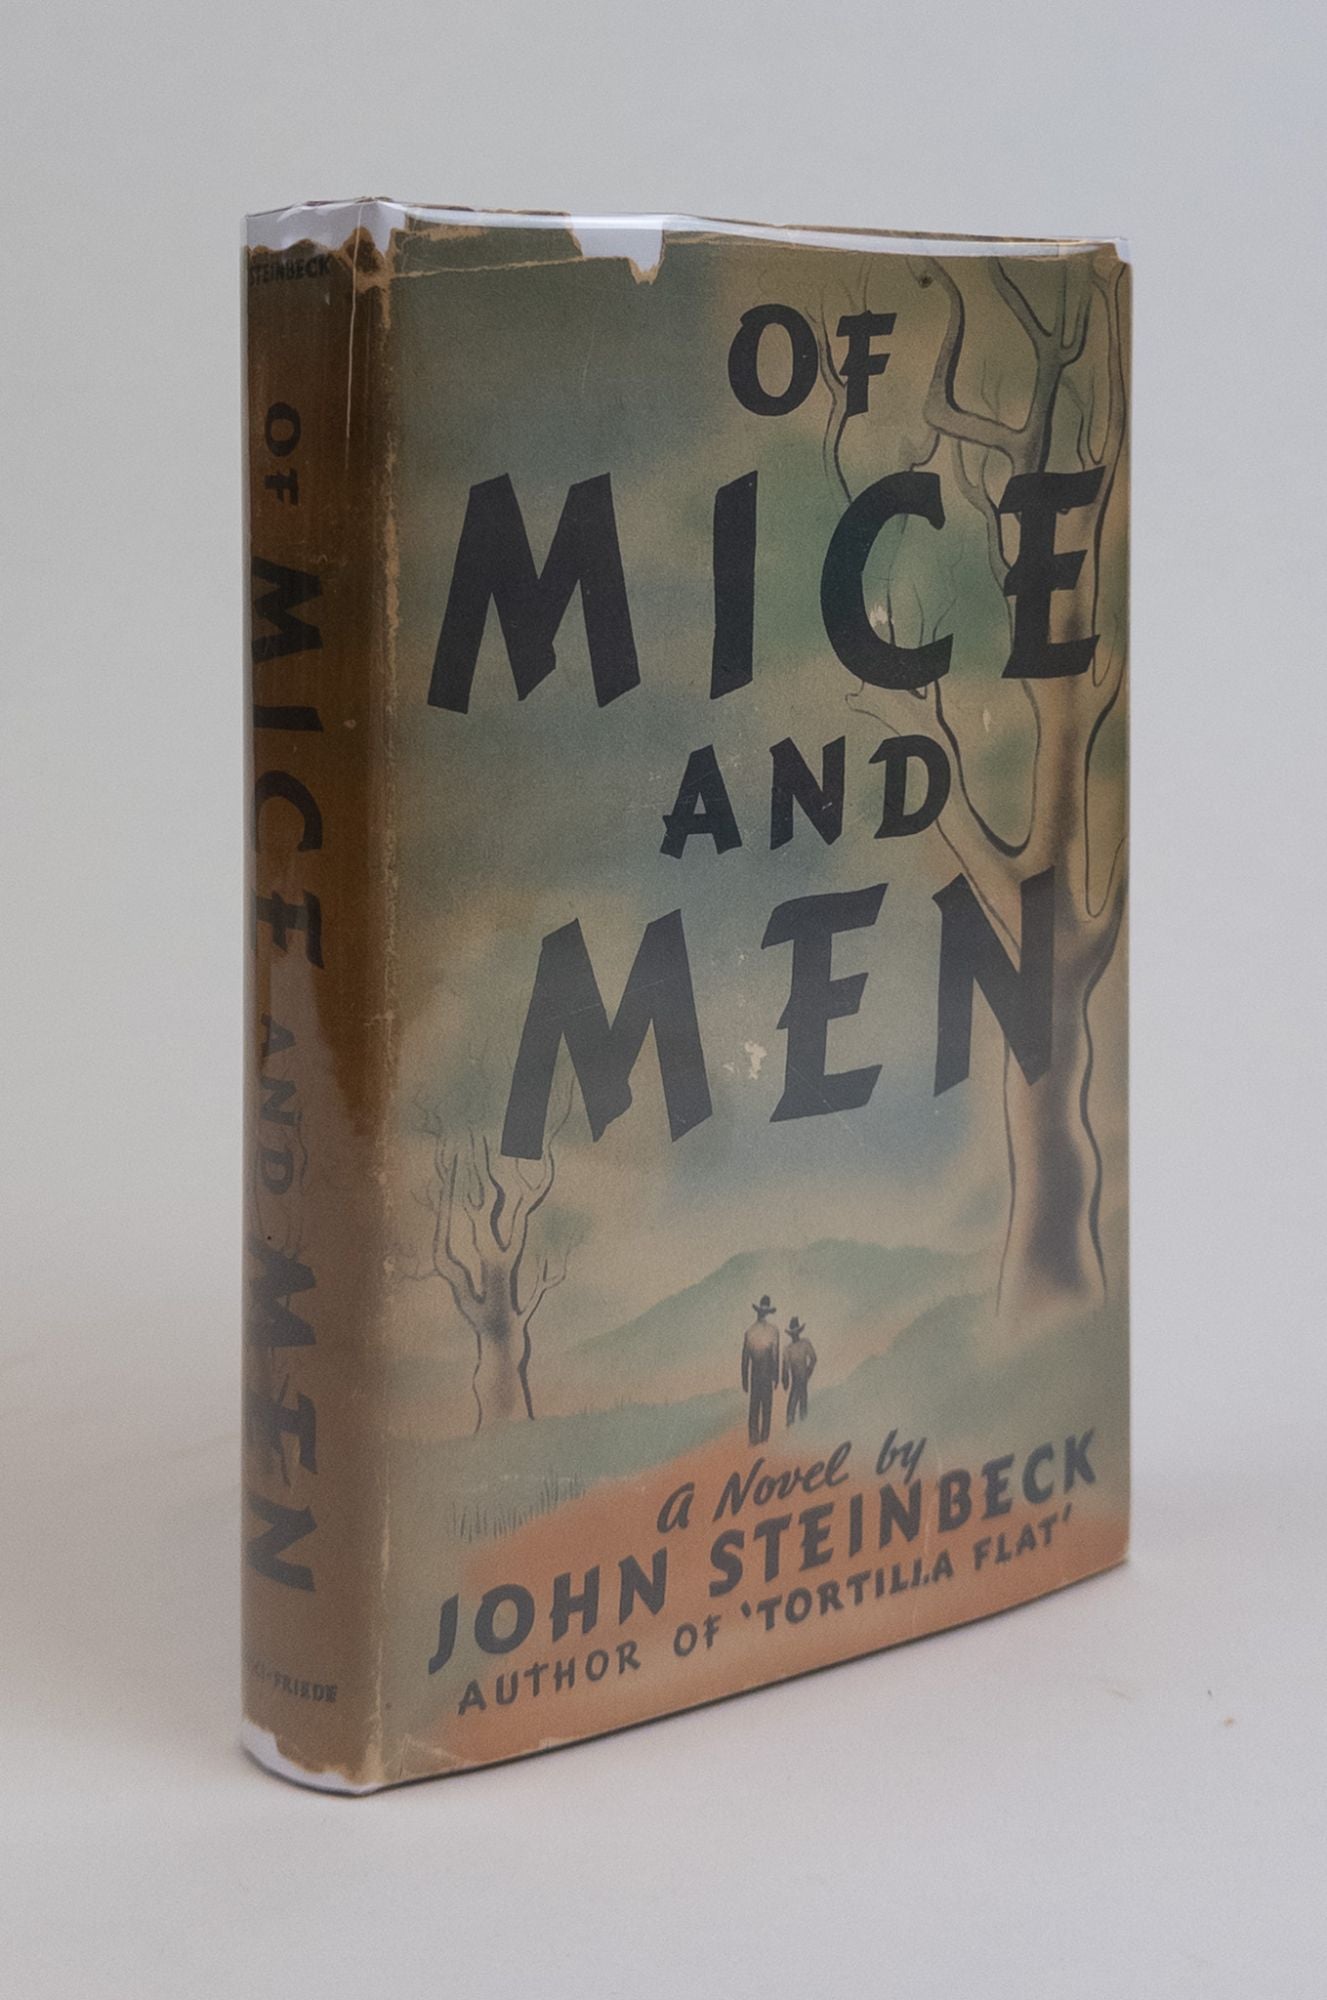 Product Image for OF MICE AND MEN